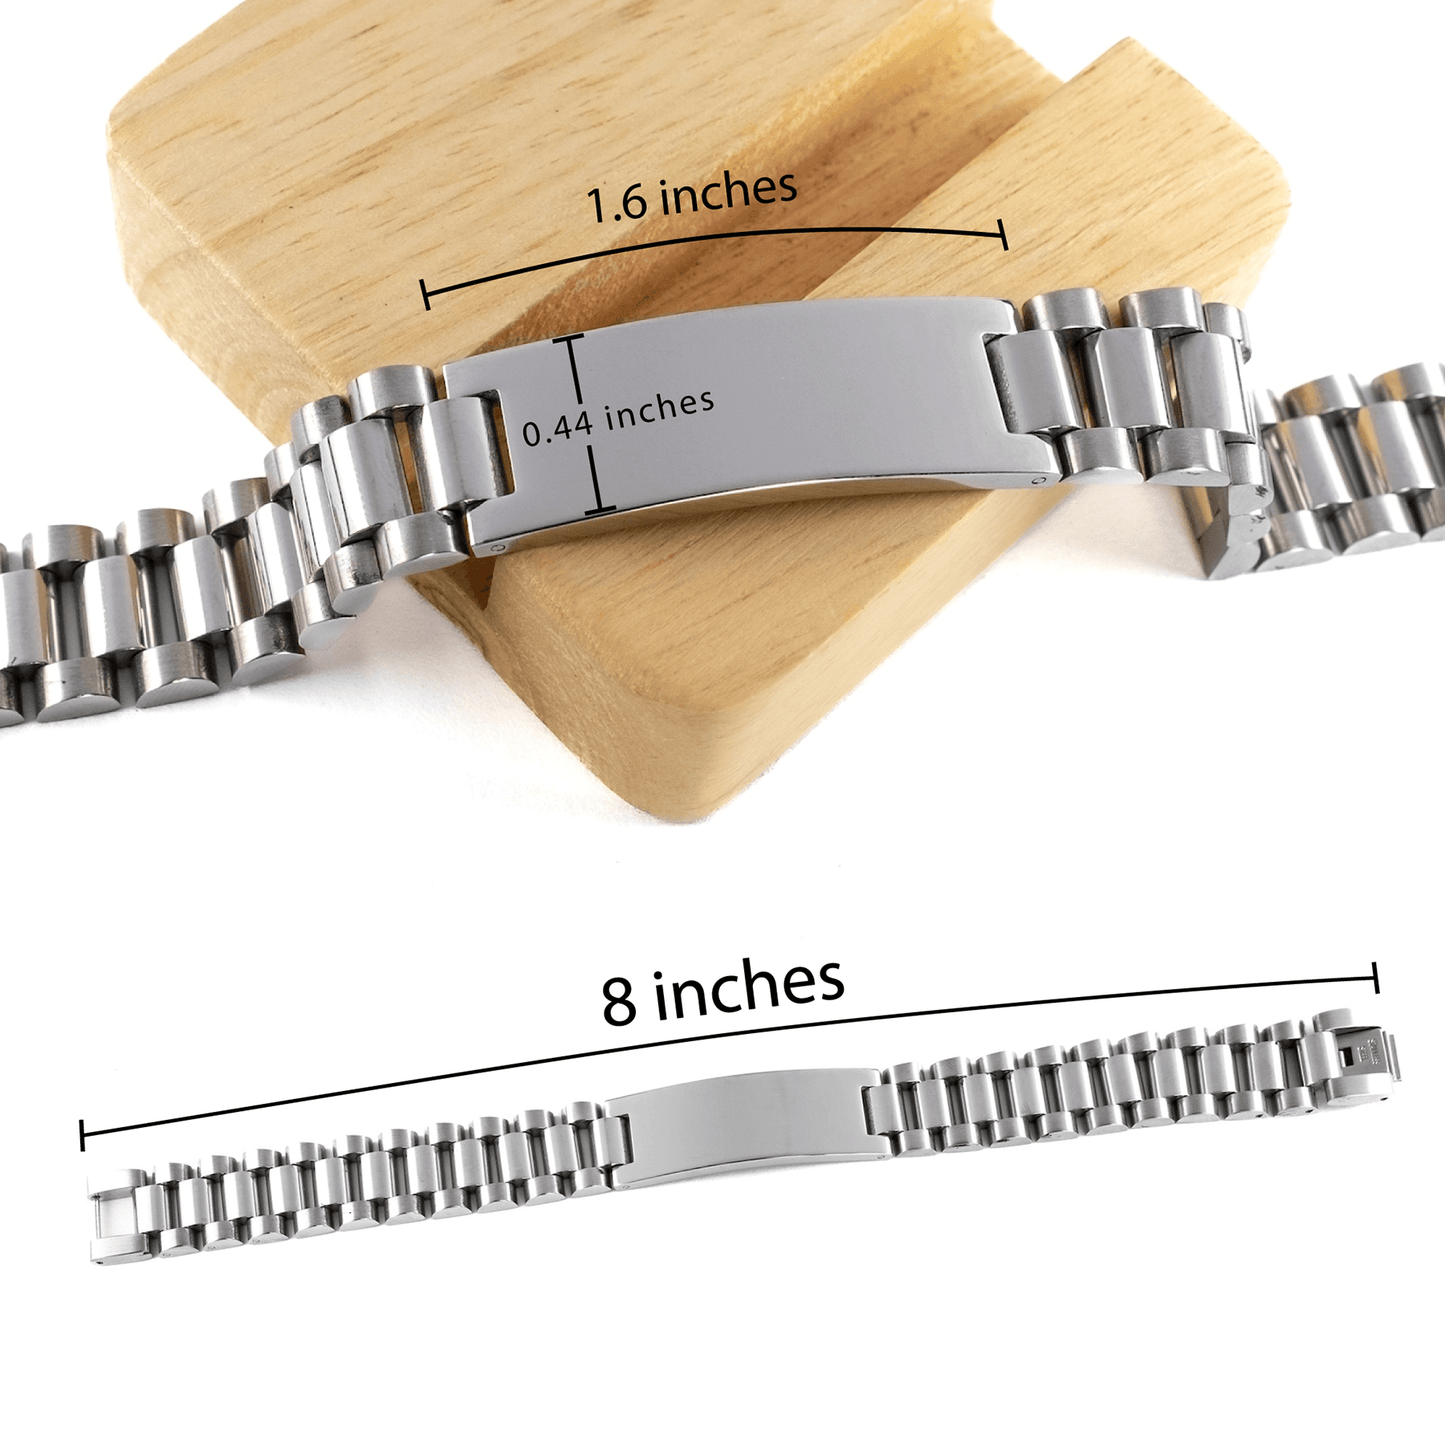 Computer Programmer Ladder Stainless Steel Engraved Bracelet - Thanks for being who you are - Birthday Christmas Jewelry Gifts Coworkers Colleague Boss - Mallard Moon Gift Shop